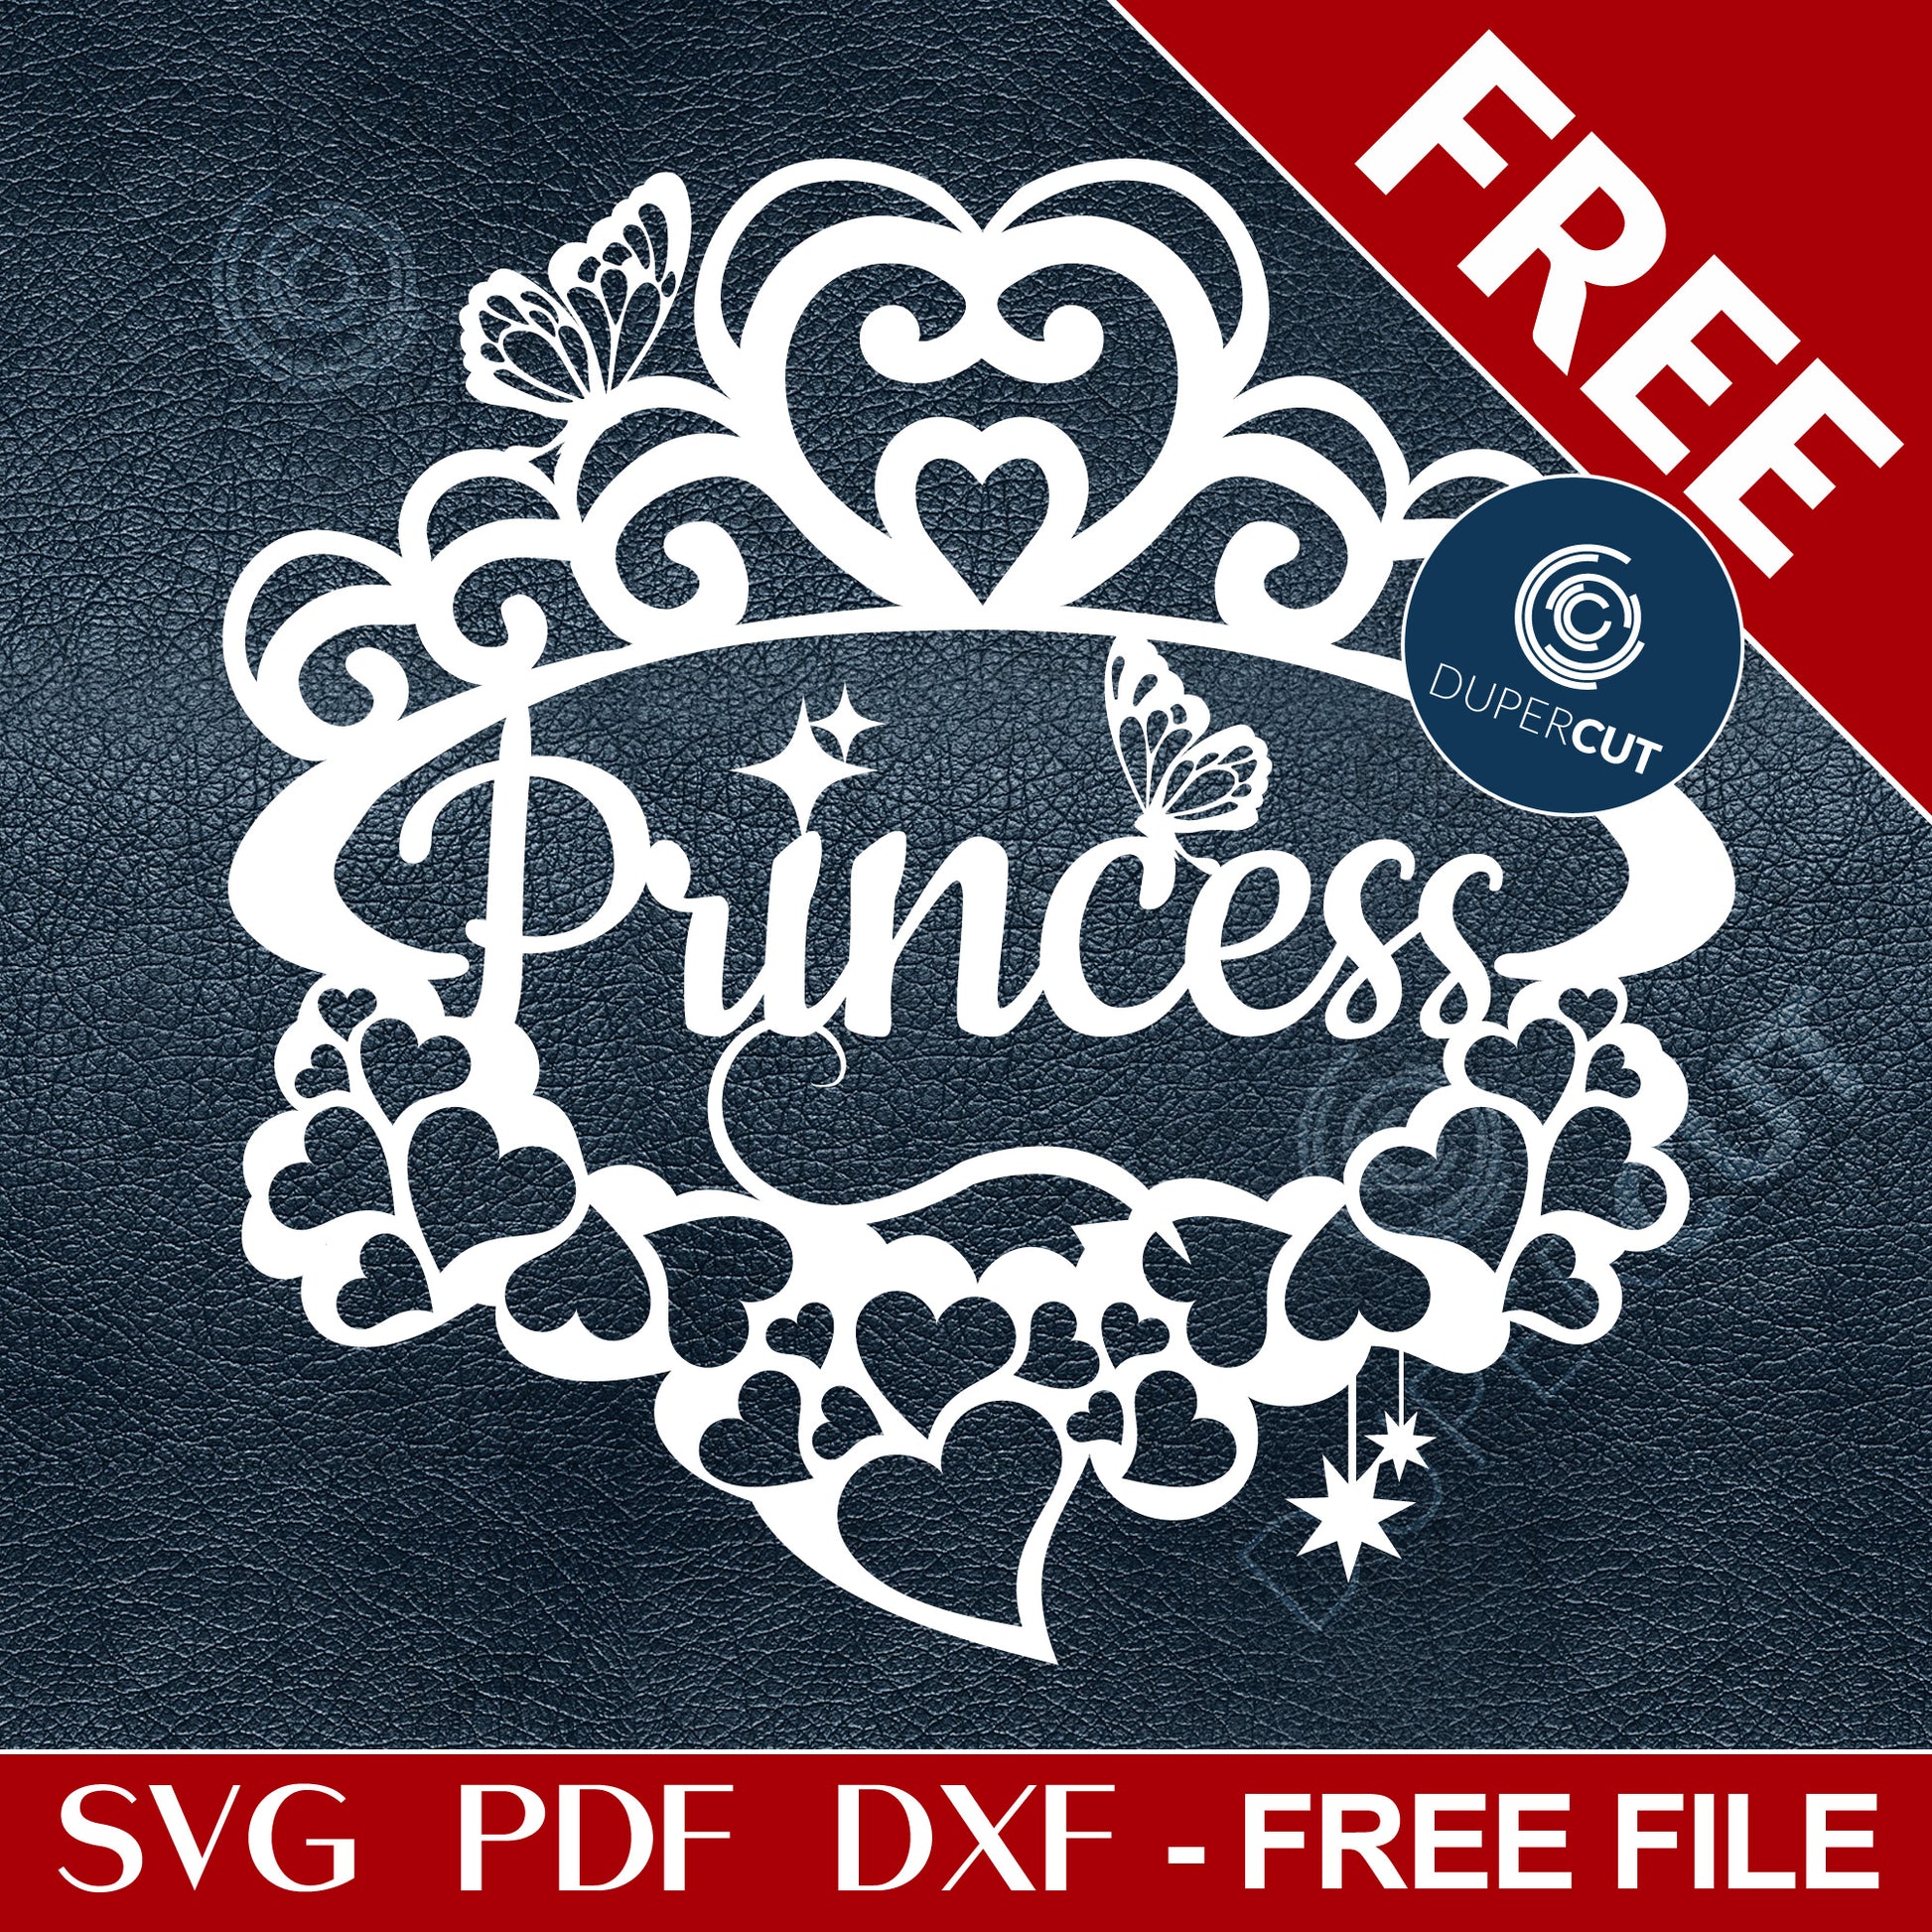 Princess sign - hearts and butterflies sign for girls room - SVG PDF DXF free cutting file for laser machines, Glowforge, Cricut, Silhouette Cameo by DuperCut